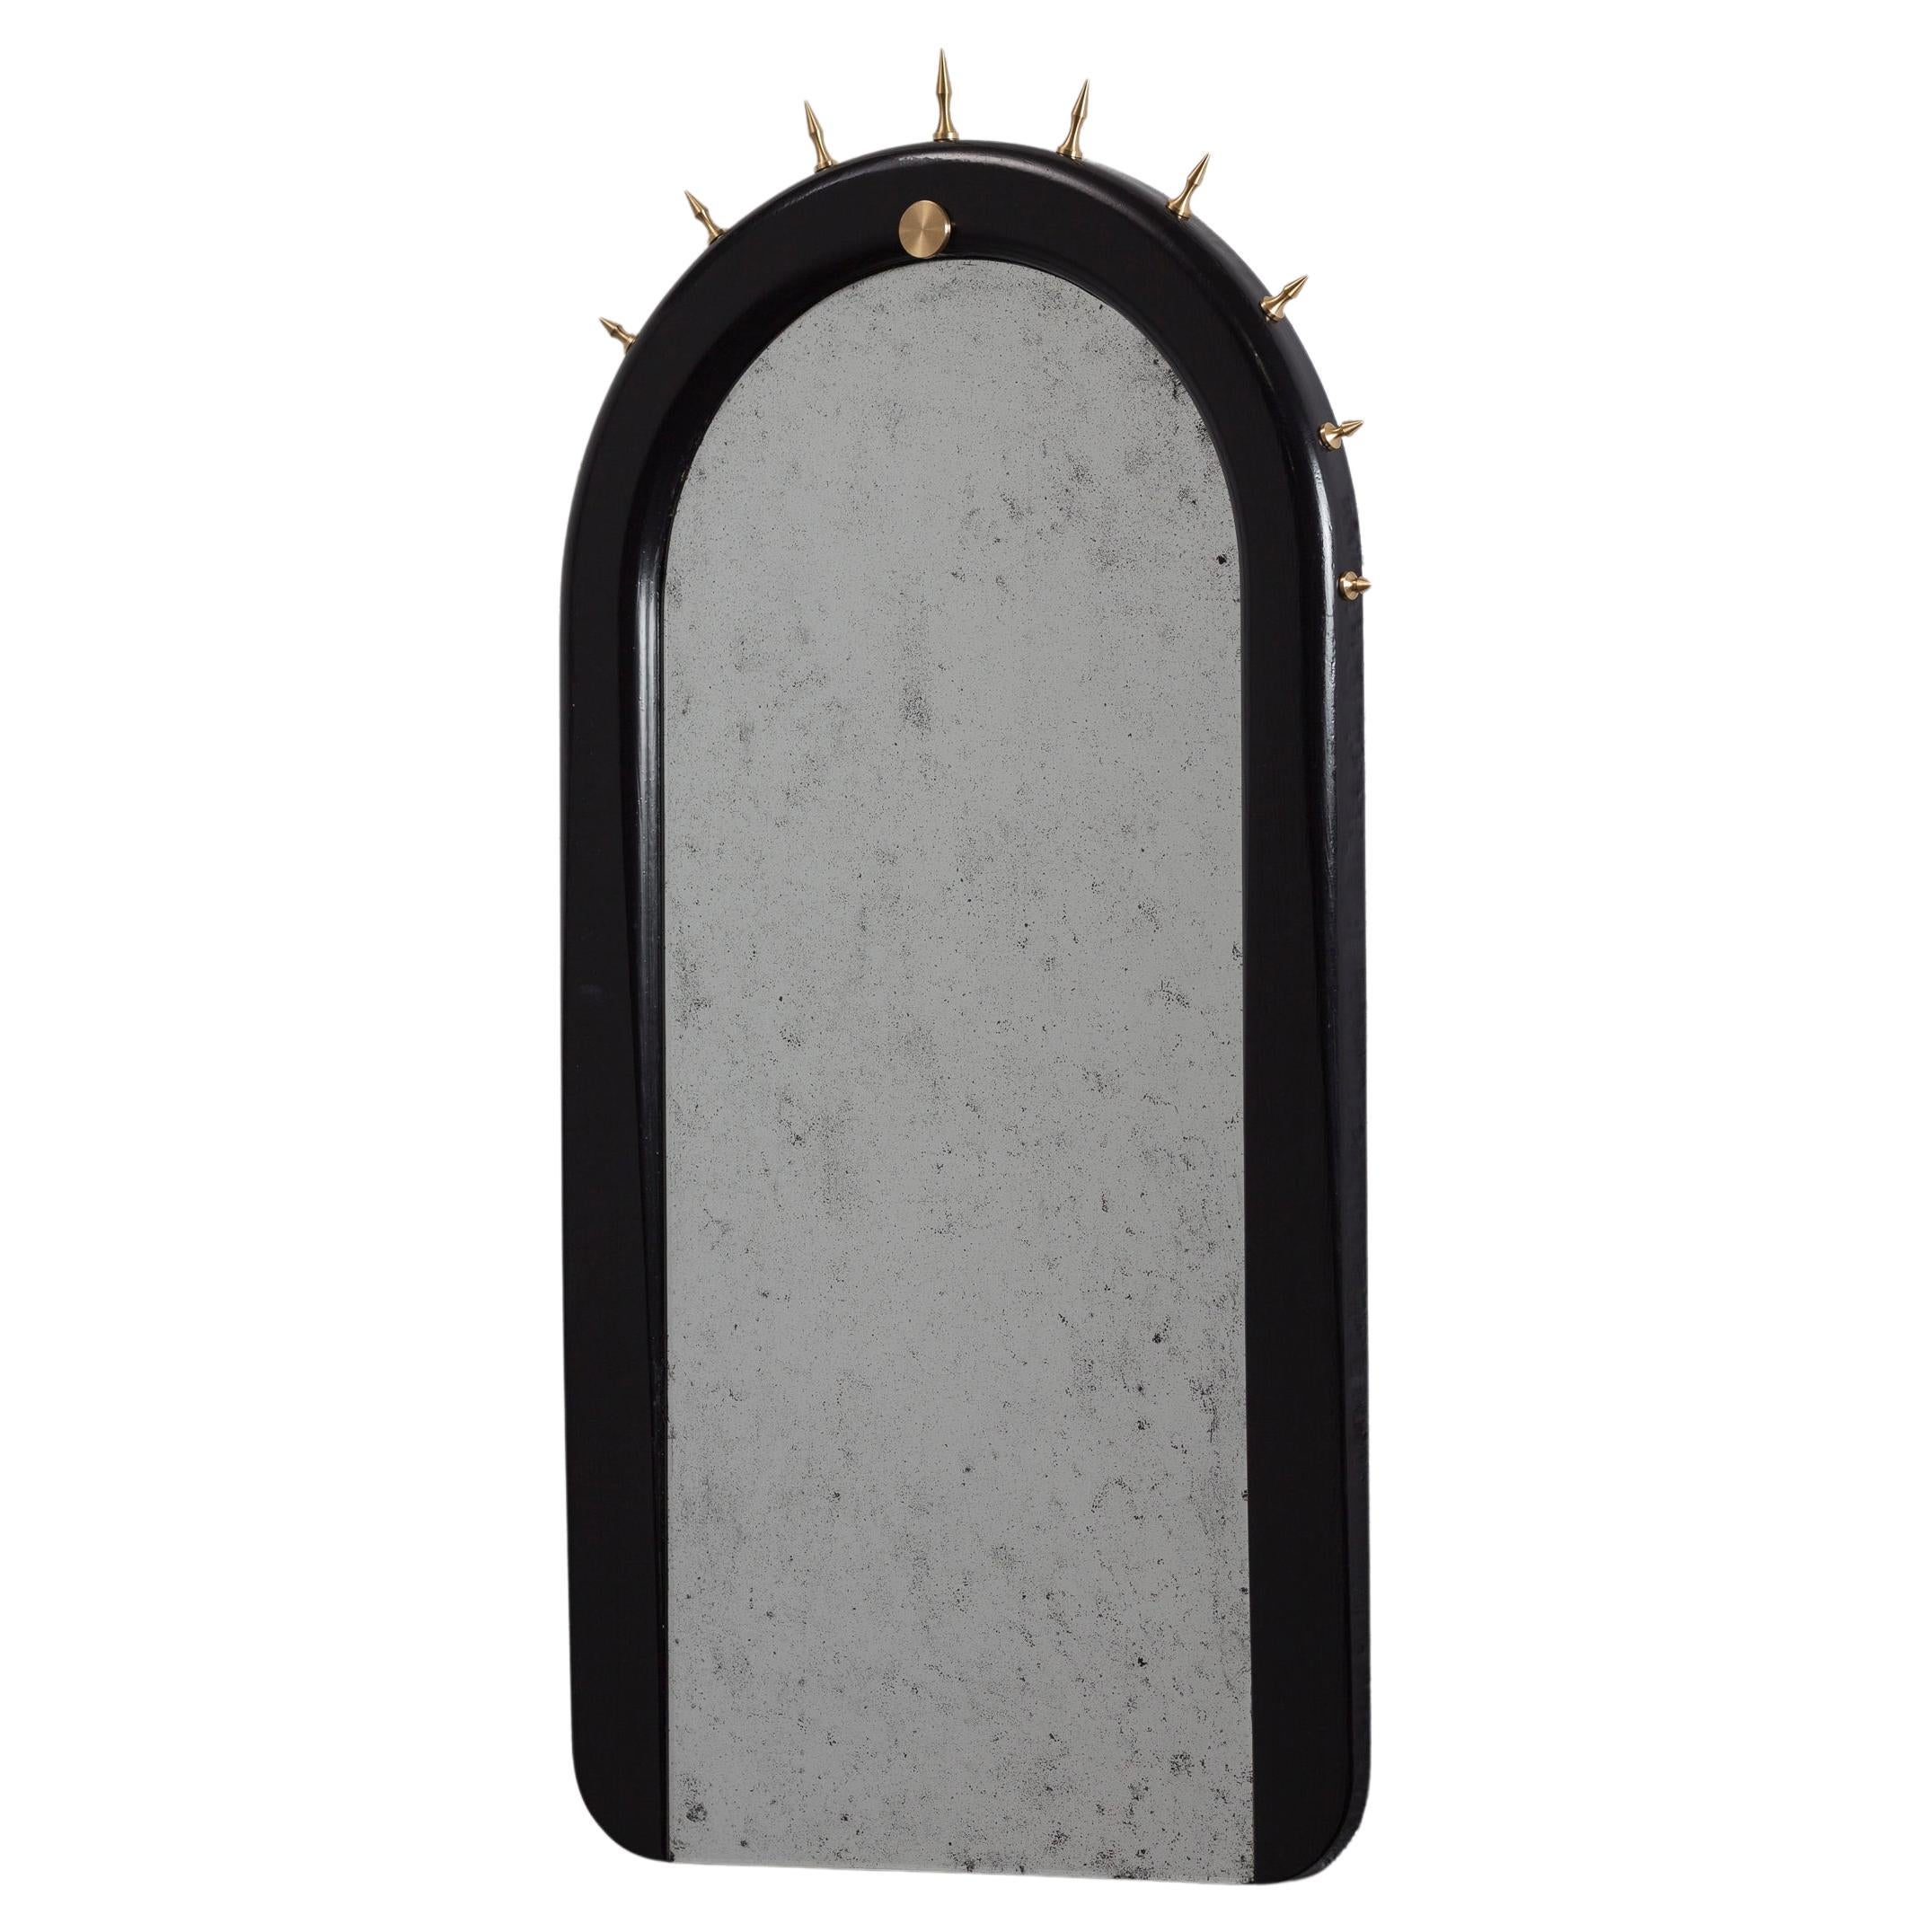 Sitiera_01 Wall Mirror in Solid Wood by ANDEAN, Represented by Tuleste Factory For Sale